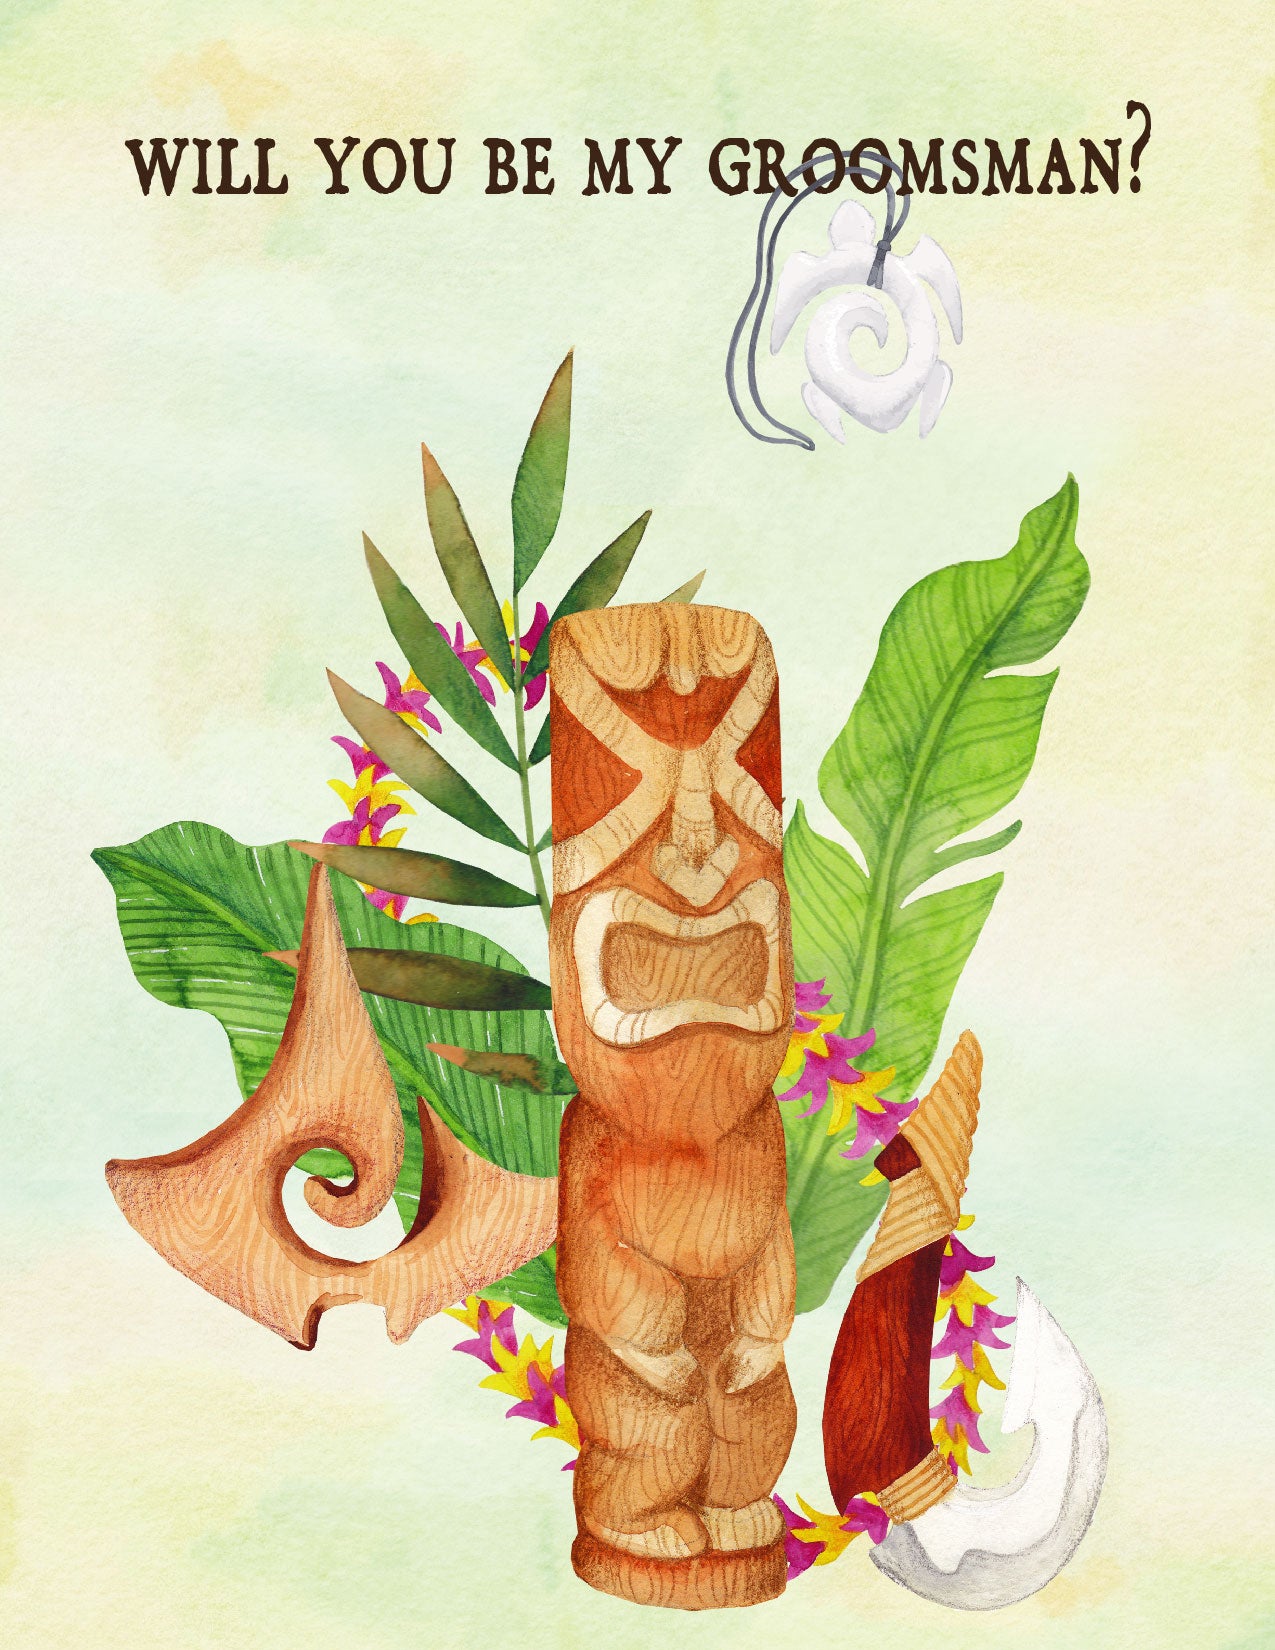 Tropical Floral Watercolor Beach Destination "Will you be my Groomsman" Digital "Instant Download" Invitation 1 - 'TROPICAL LUSH"